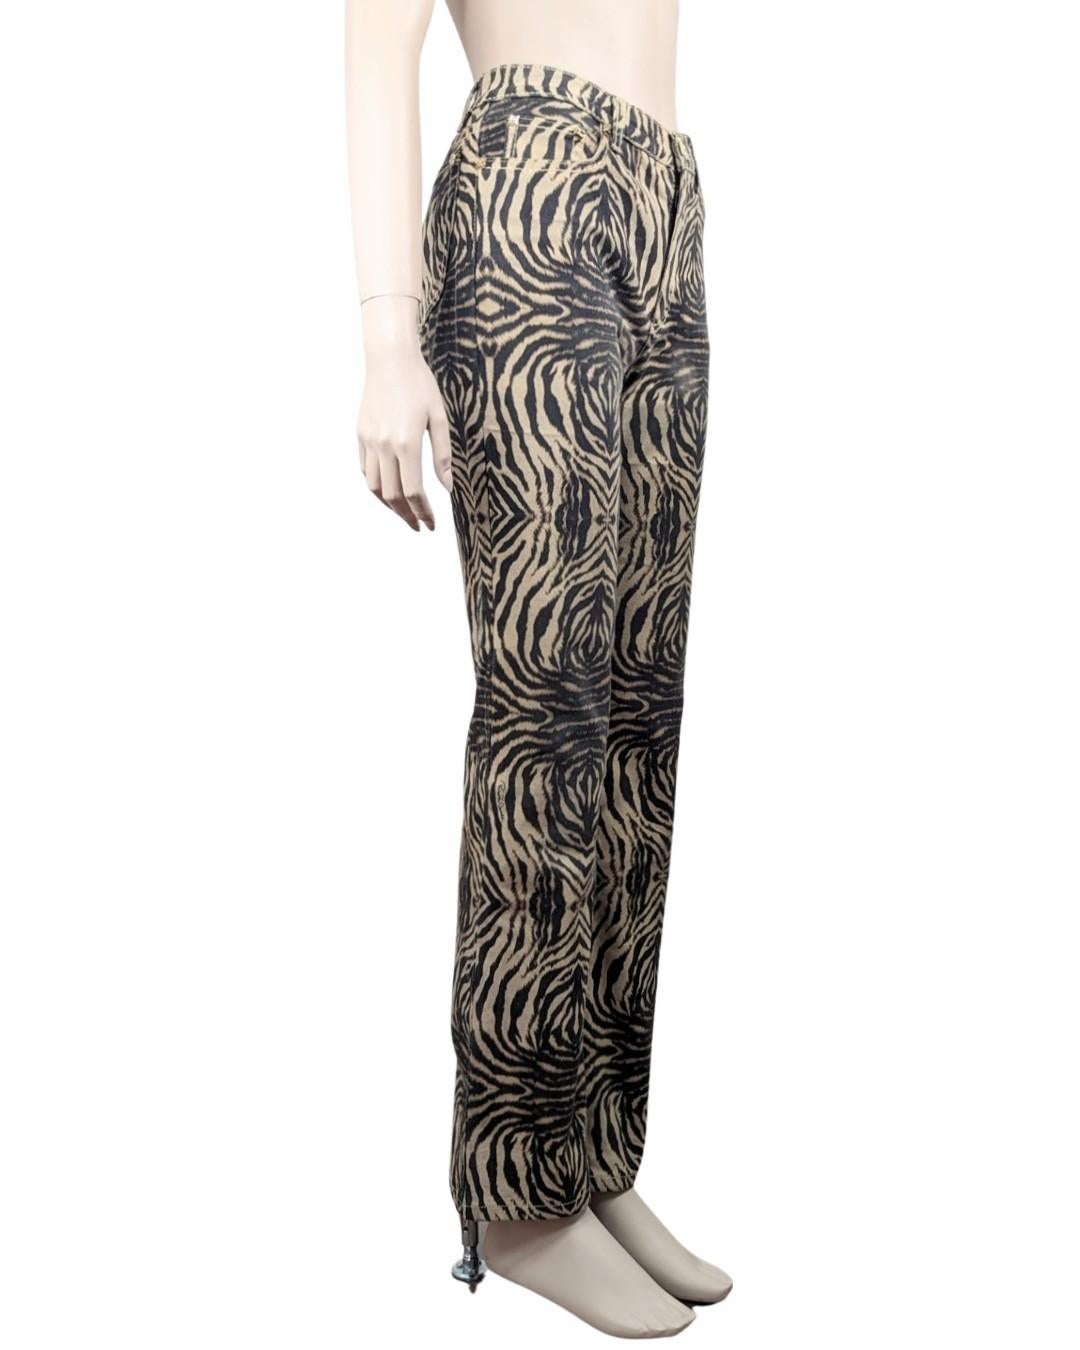 Roberto Cavalli animal print jeans In Excellent Condition For Sale In GOUVIEUX, FR